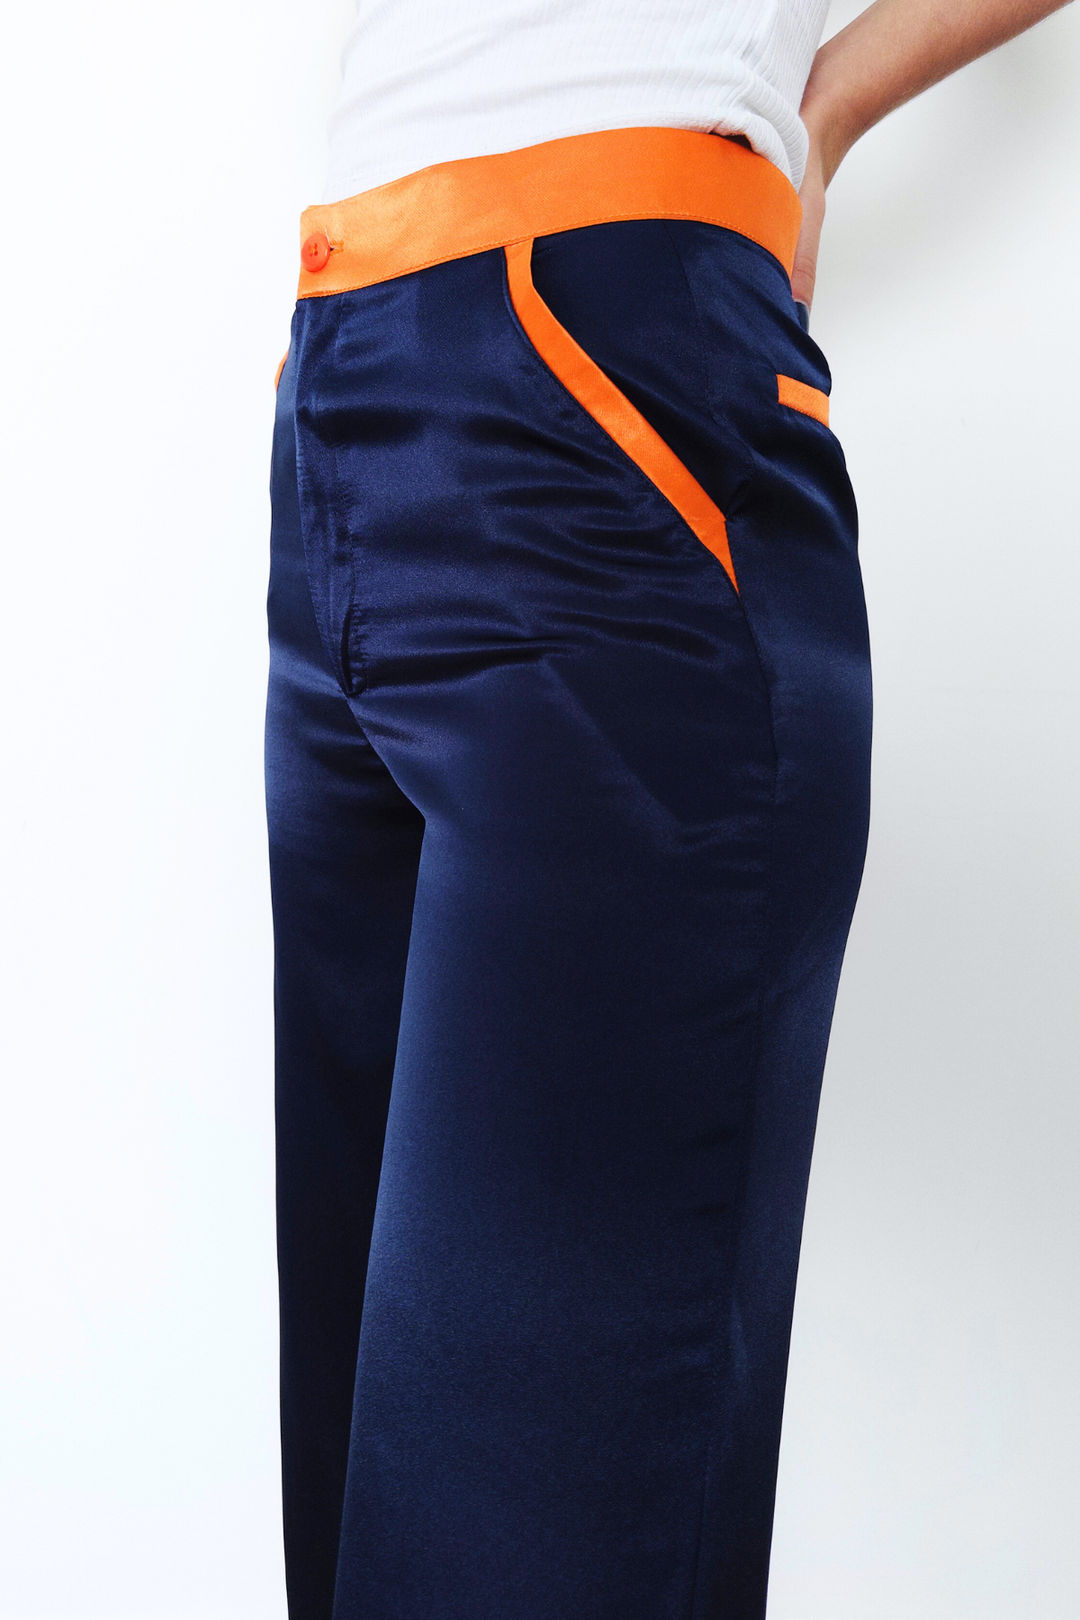 navy silk trousers, wide-leg, with orange contrast trims worn in London